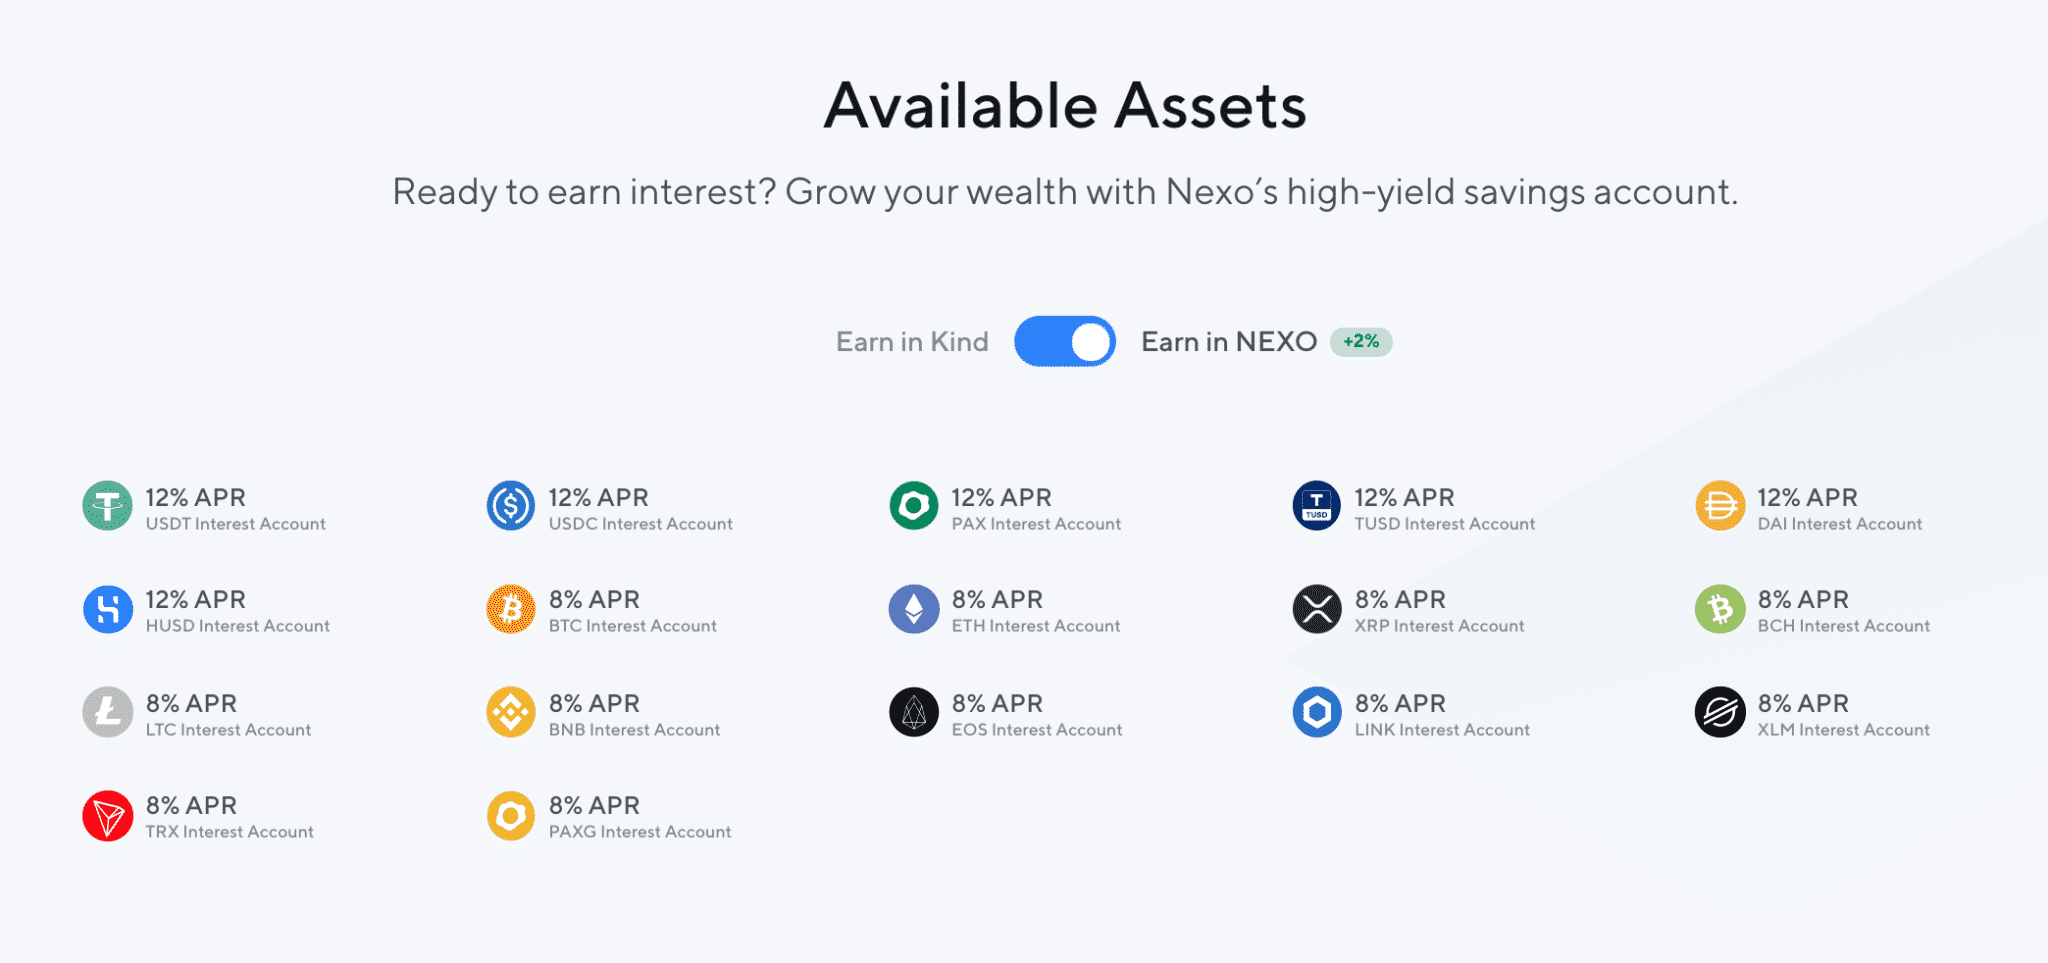 NEXO APY when Earn in Nexo option is selected